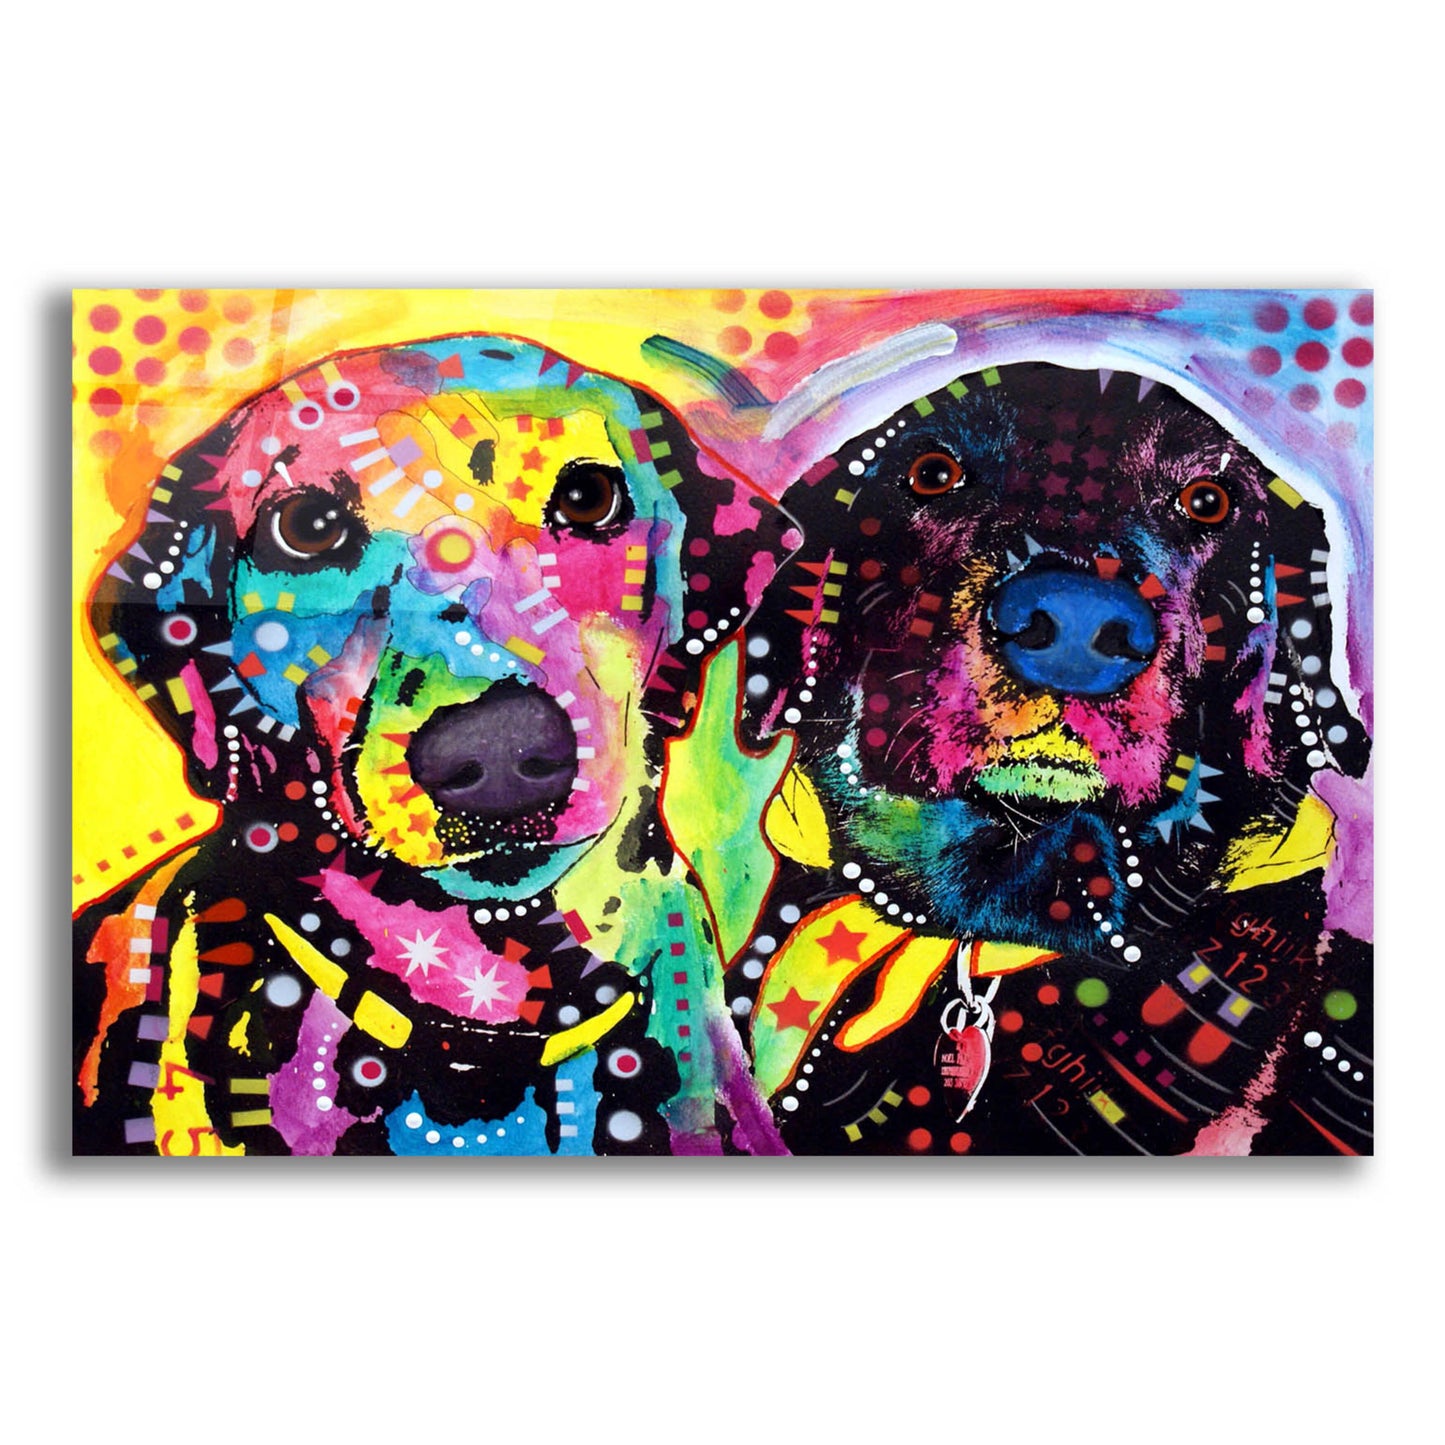 Epic Art 'Daisy and Noel' by Dean Russo, Acrylic Glass Wall Art,16x12